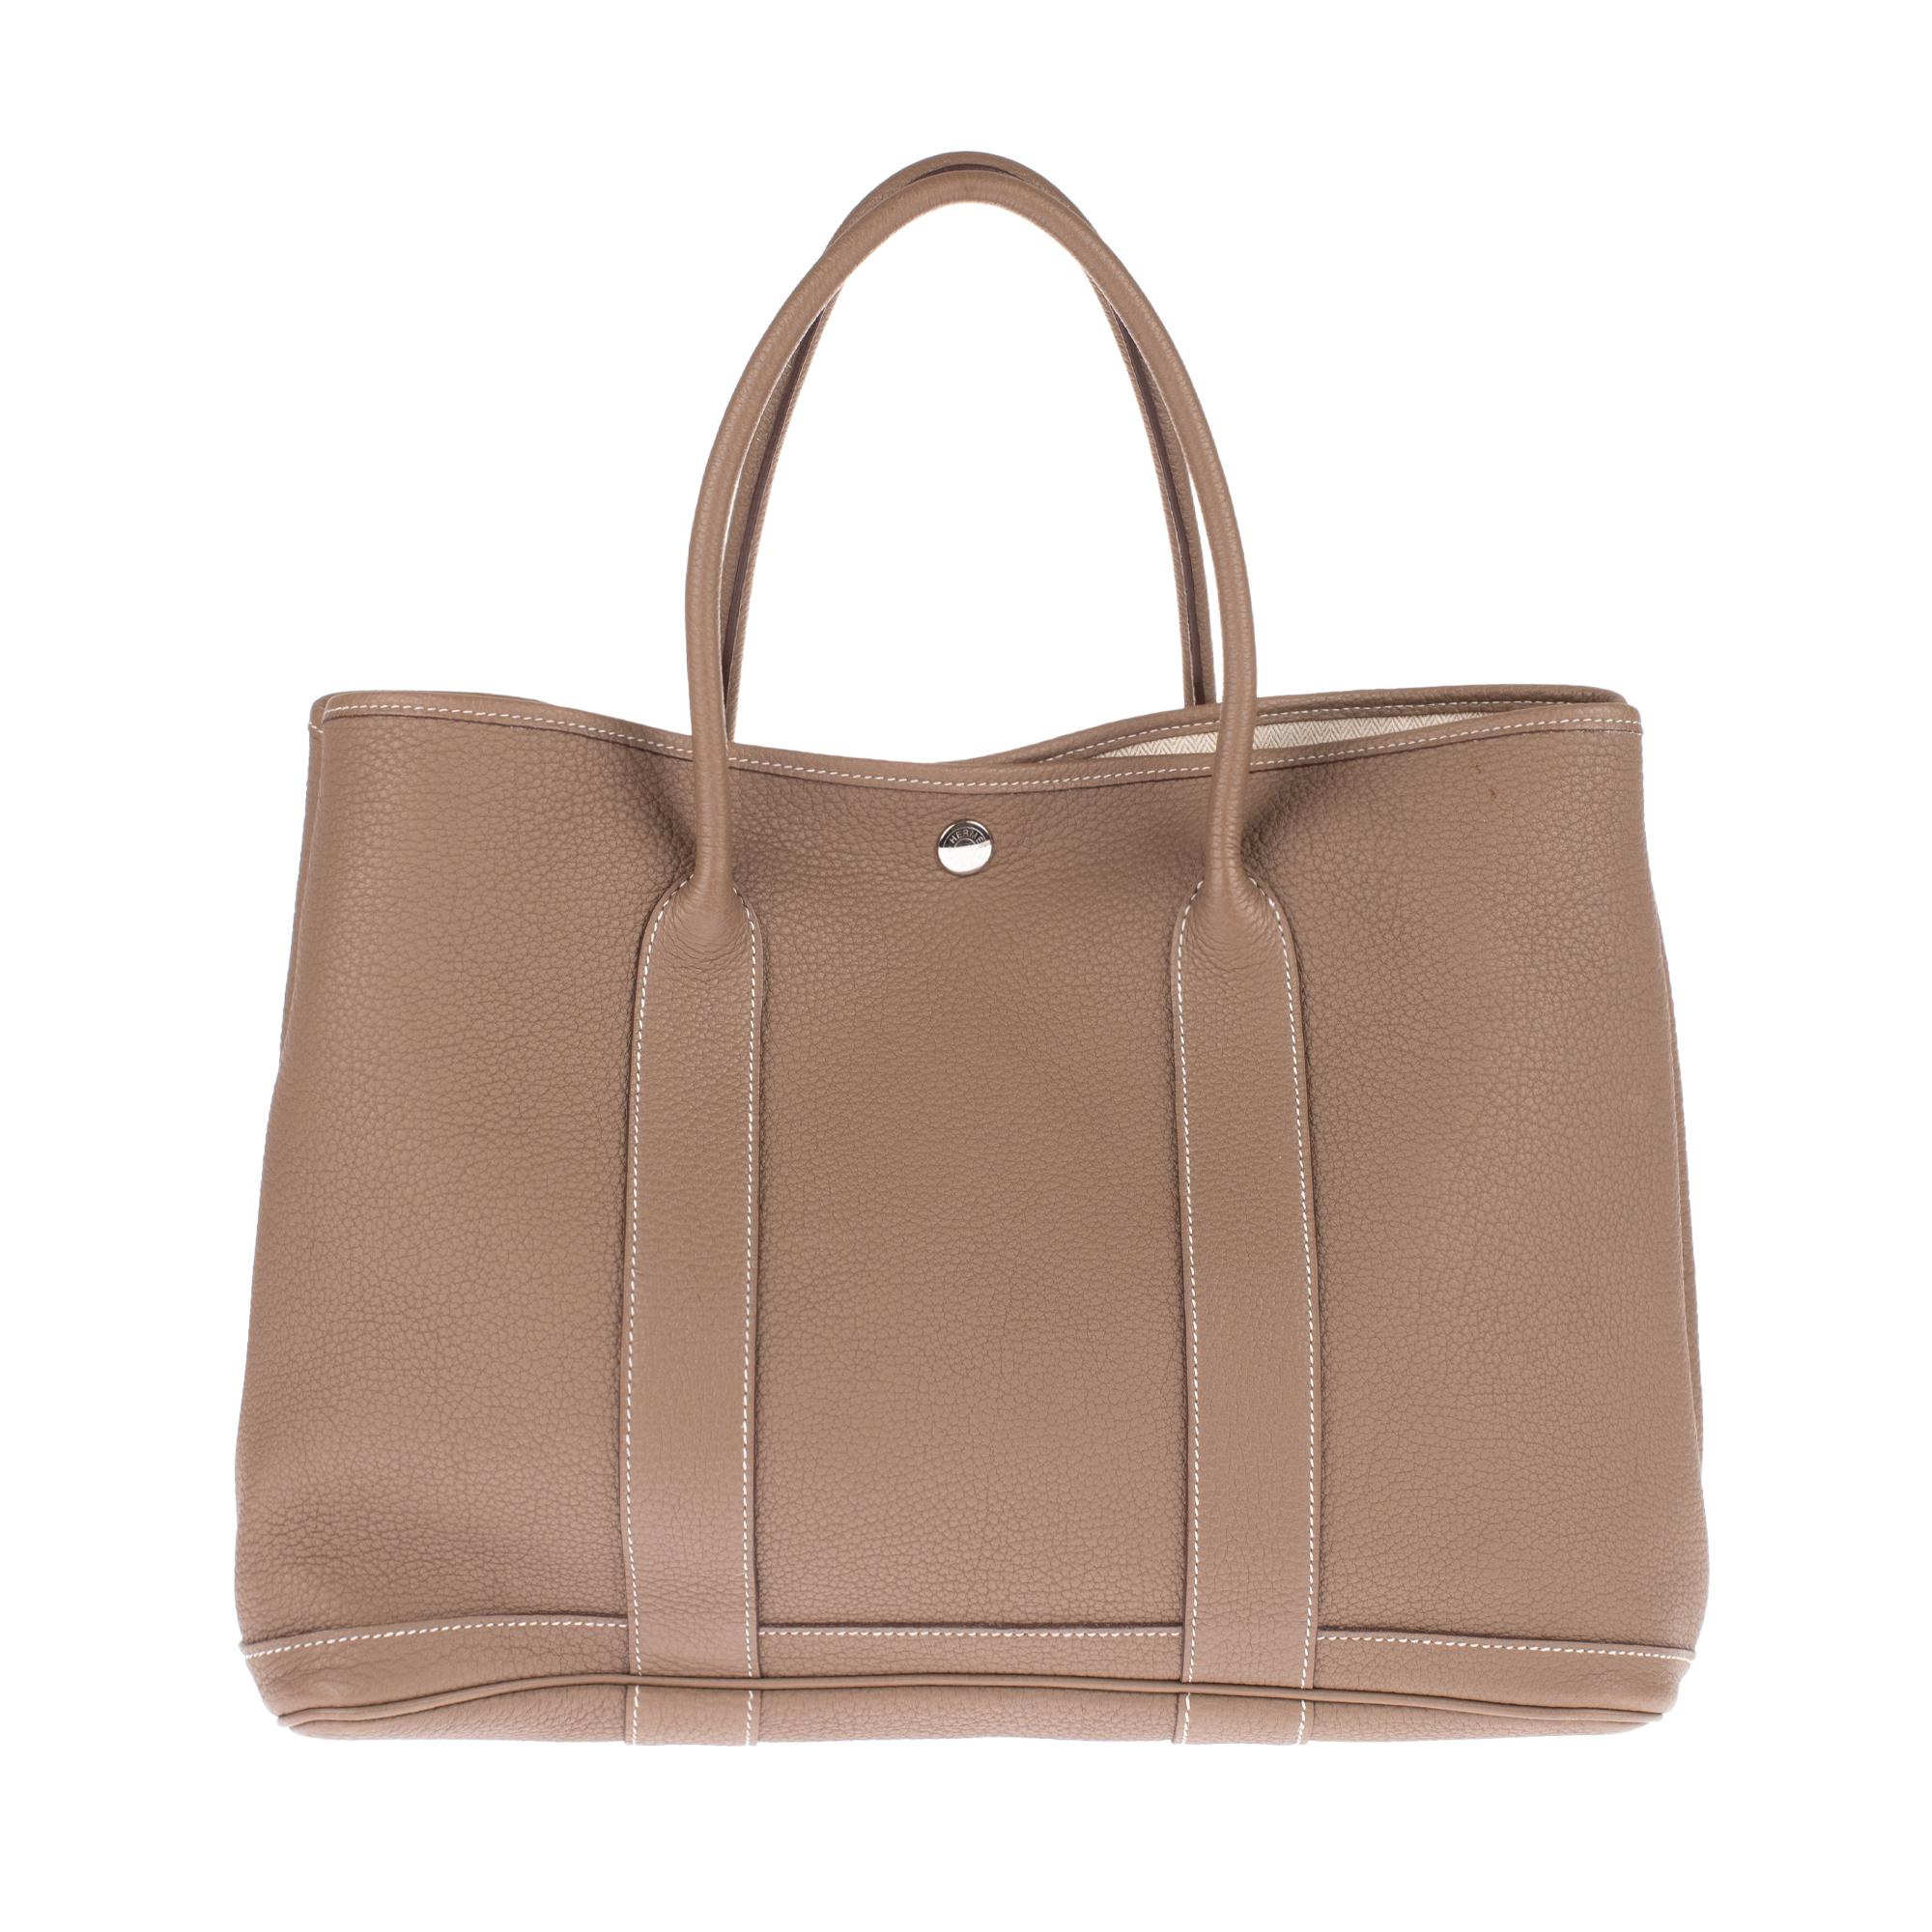 HERMES Negonda Garden Party 36 MM Etoupe.
This stylish tote is finely crafted of luxurious richly grained leather in étoupe. The shoulder bag features expandable sides with a snap, facing trim with white top stitching that transitions into rolled